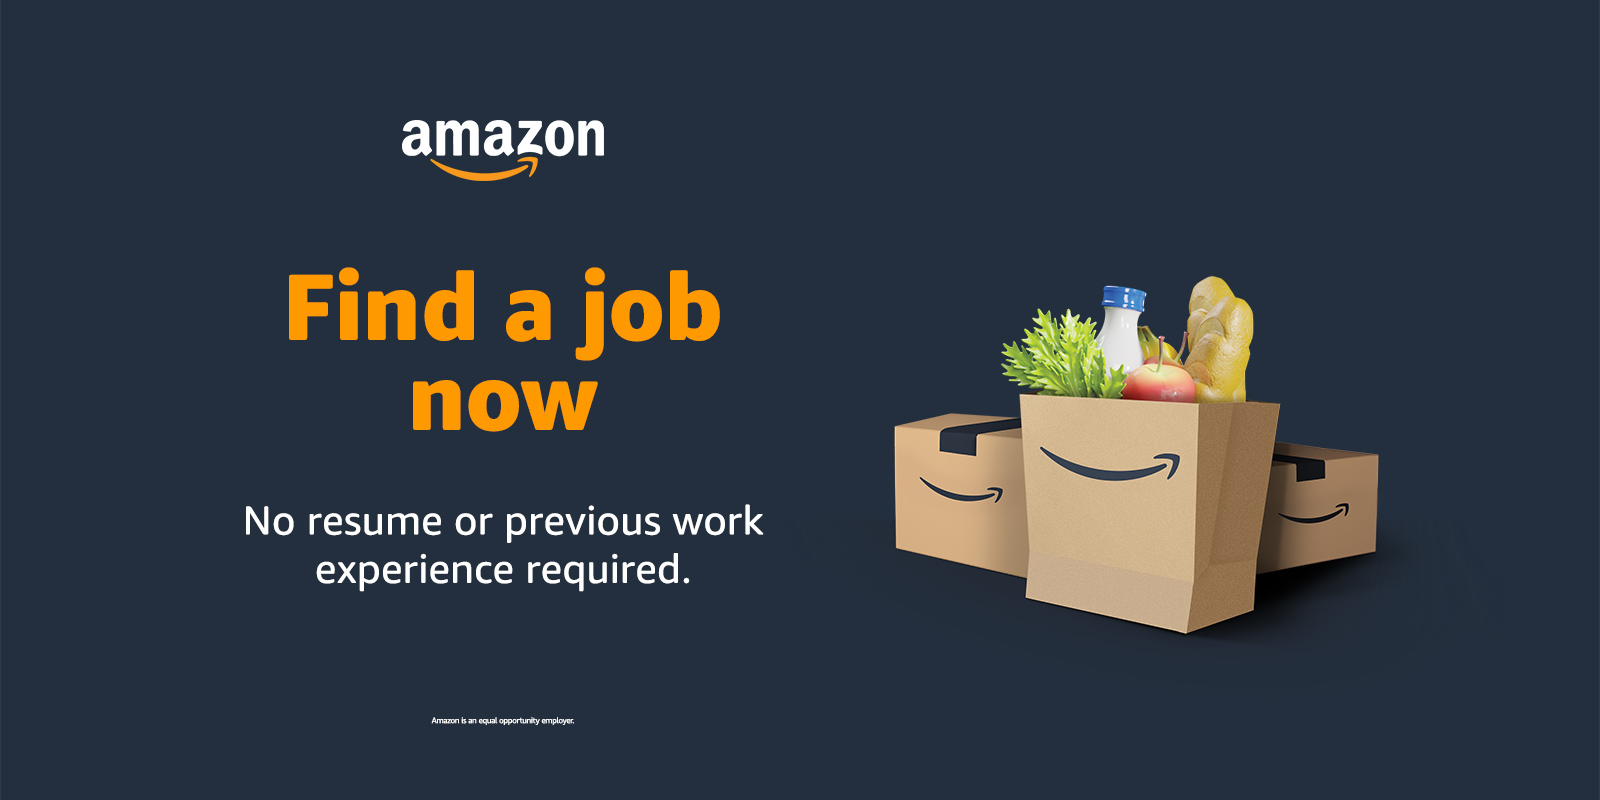 Fulfillment Center Jobs in San Diego at Amazon